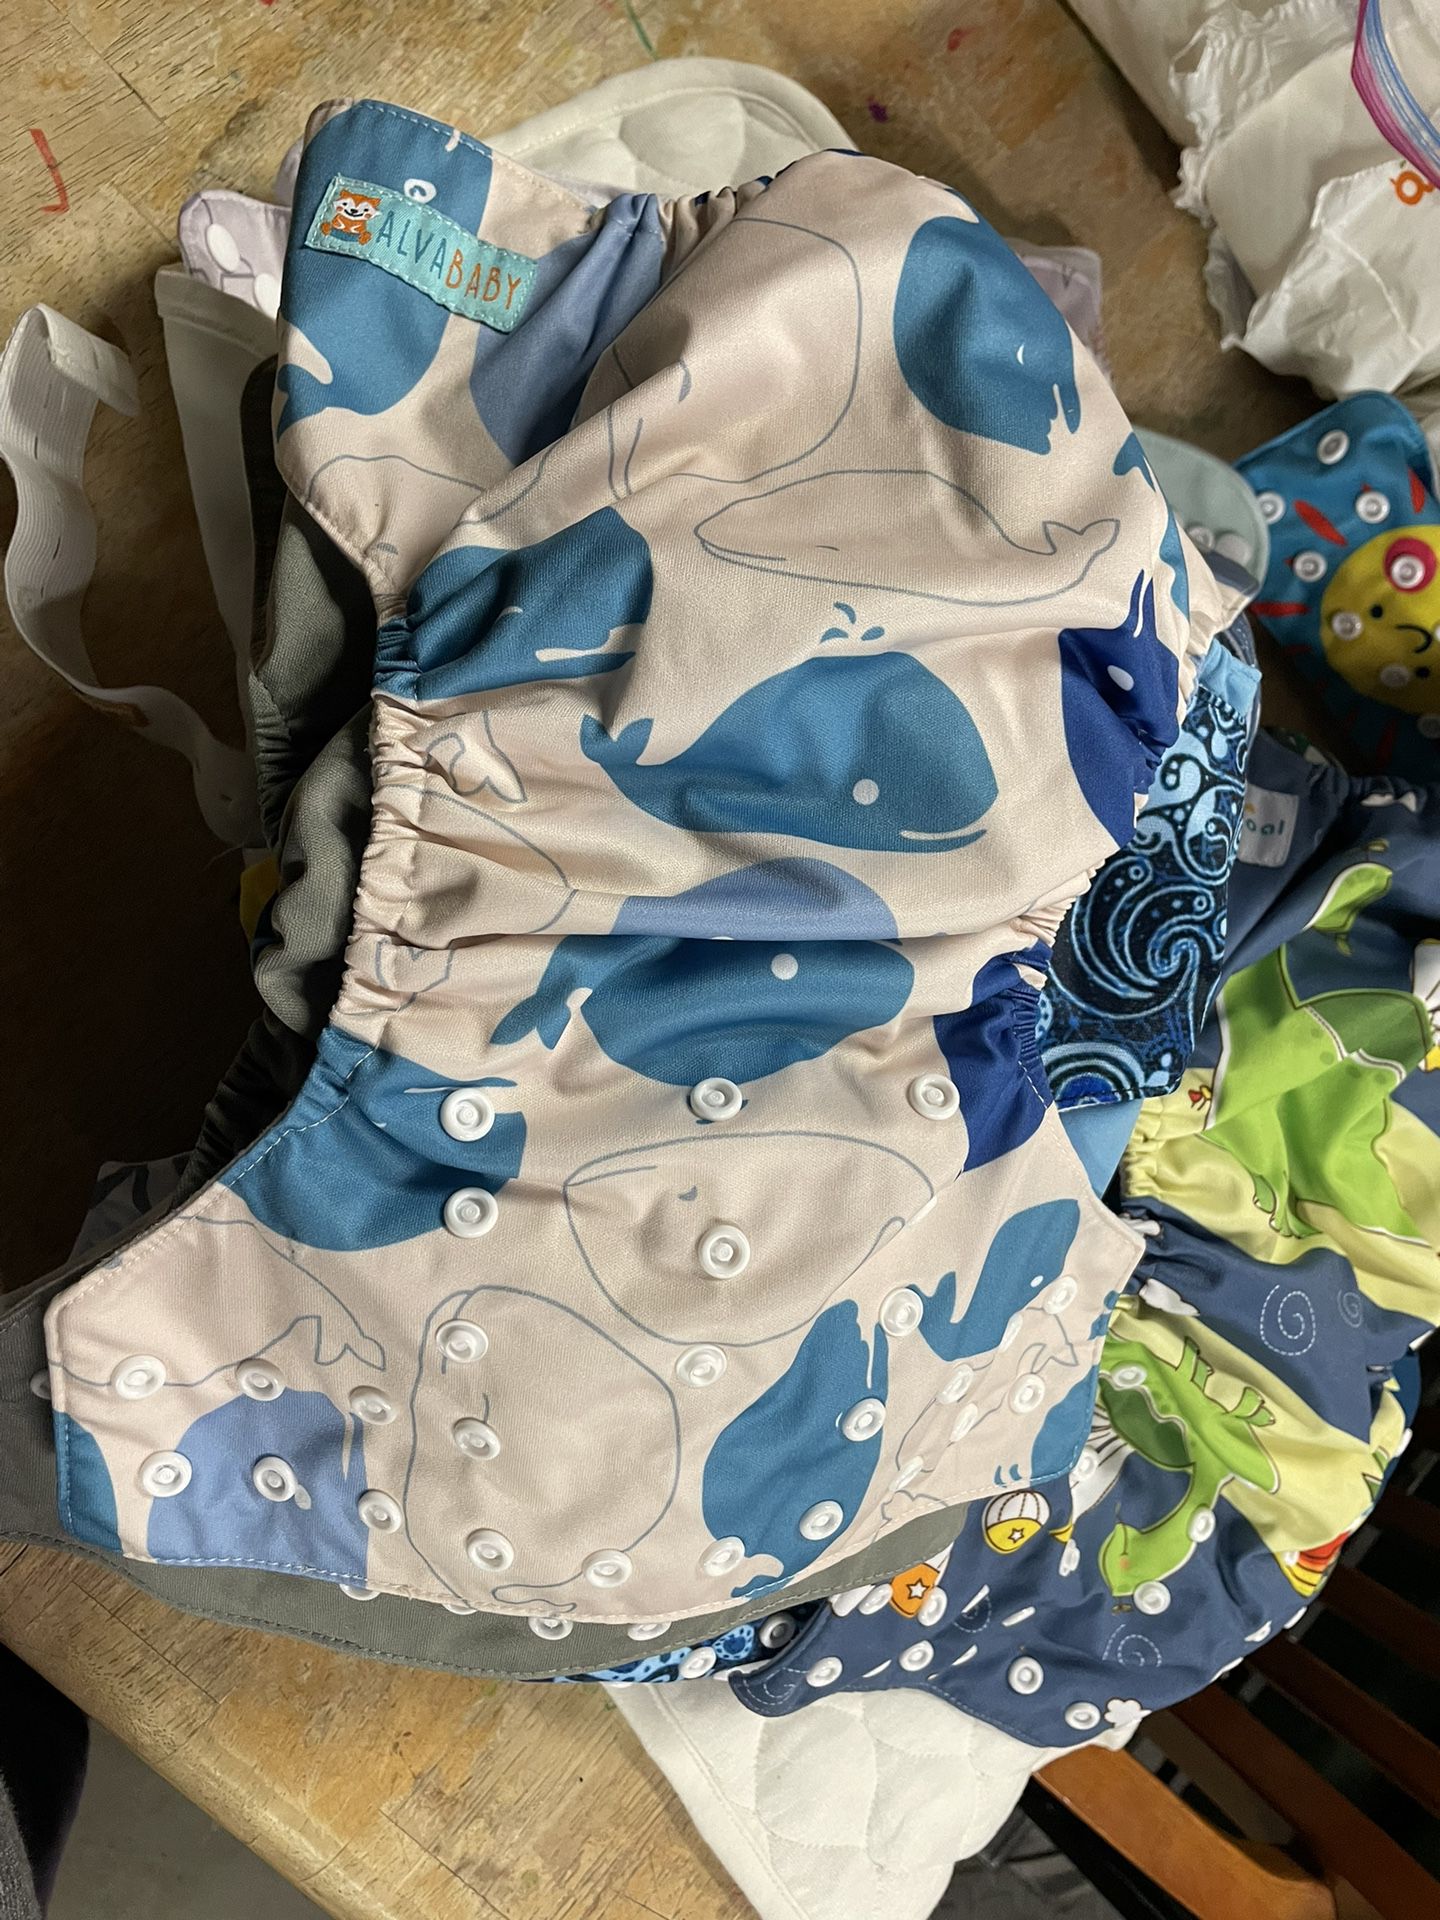 Baby Cloth Diapers/ G diapers